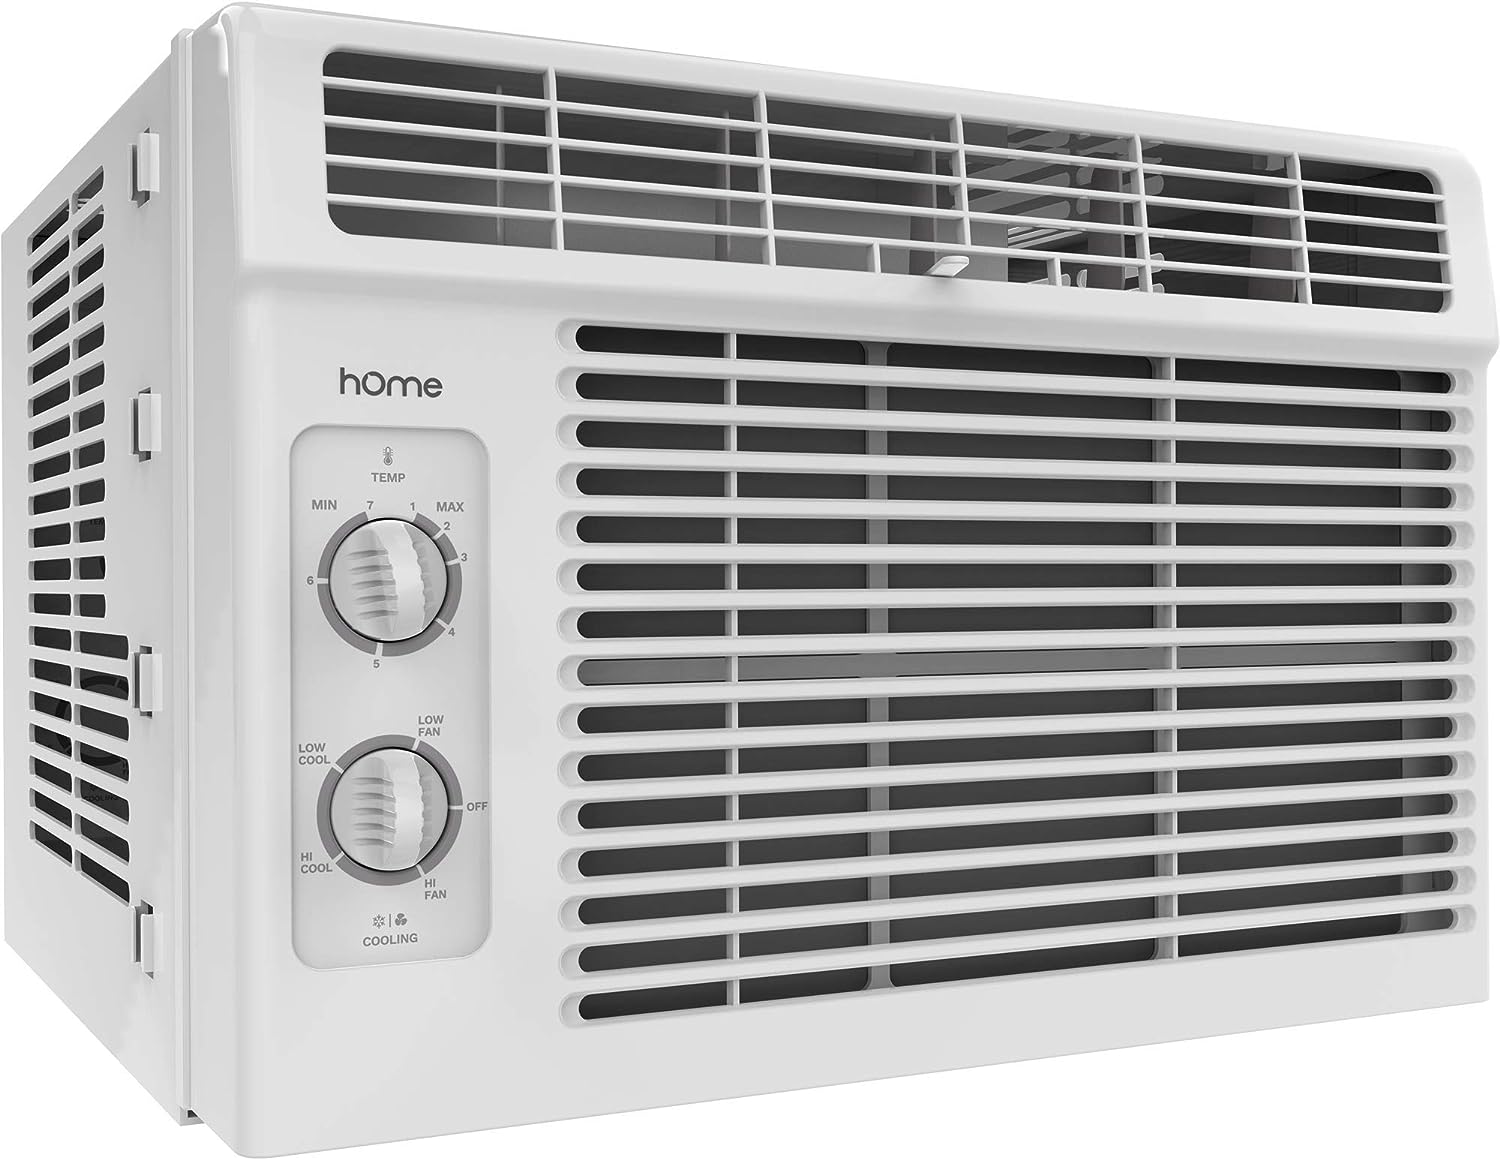 hOmeLabs Window Air Conditioner 5000 BTU - Easy Mechanical Control Compact AC Unit with Washable Reusable Filter, 2 Cooling Speeds, 2 Fan Speeds - Ideal for Bedroom and R - $109.99